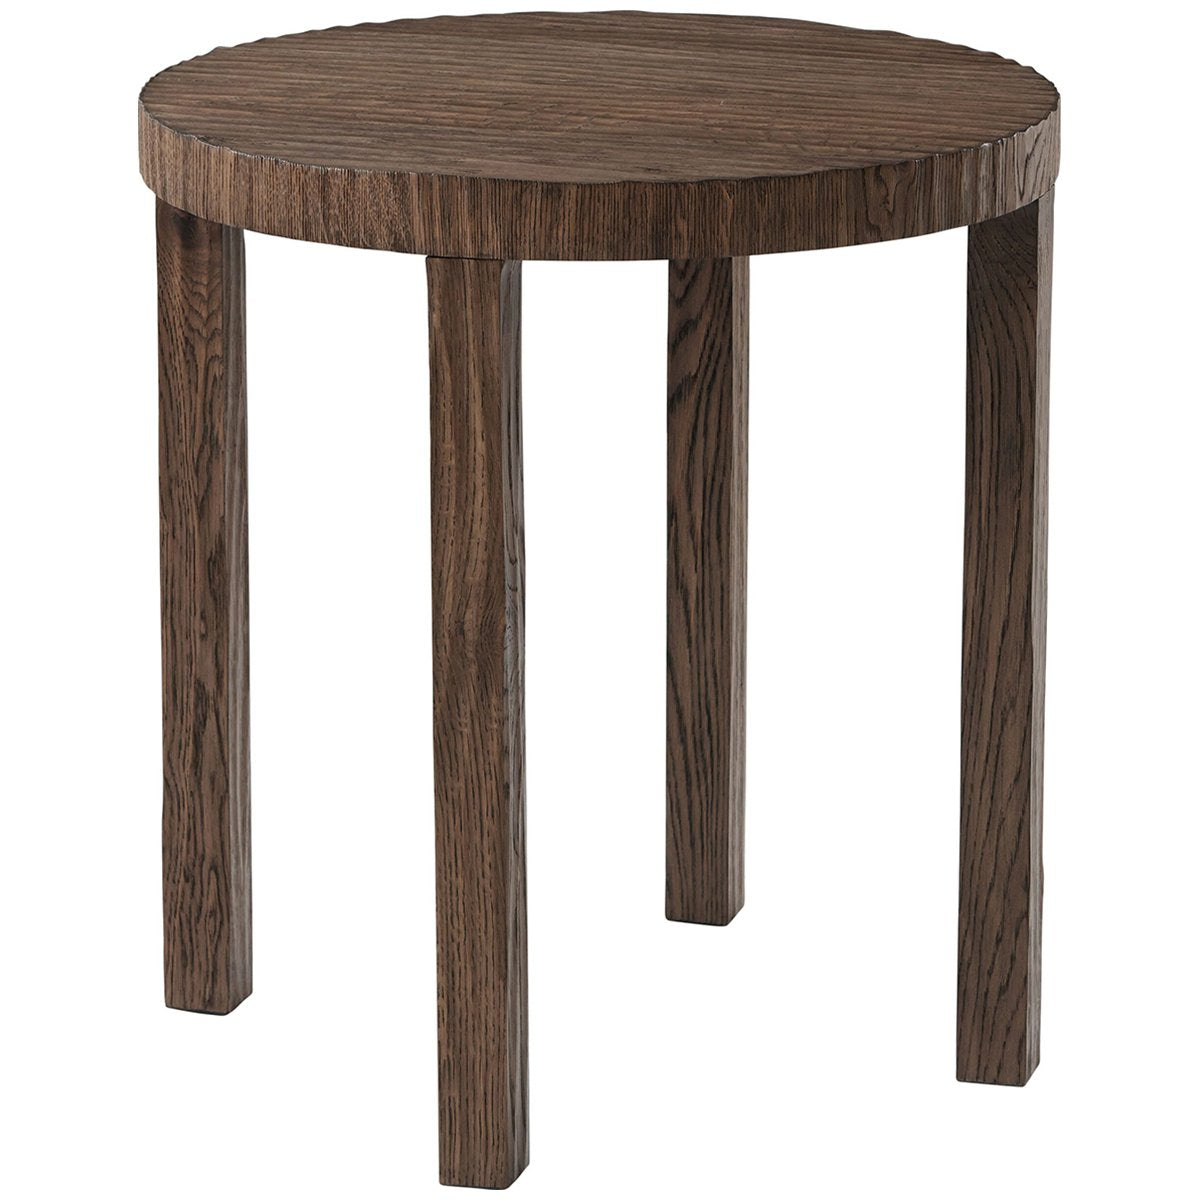 Theodore Alexander Mariano Side Table